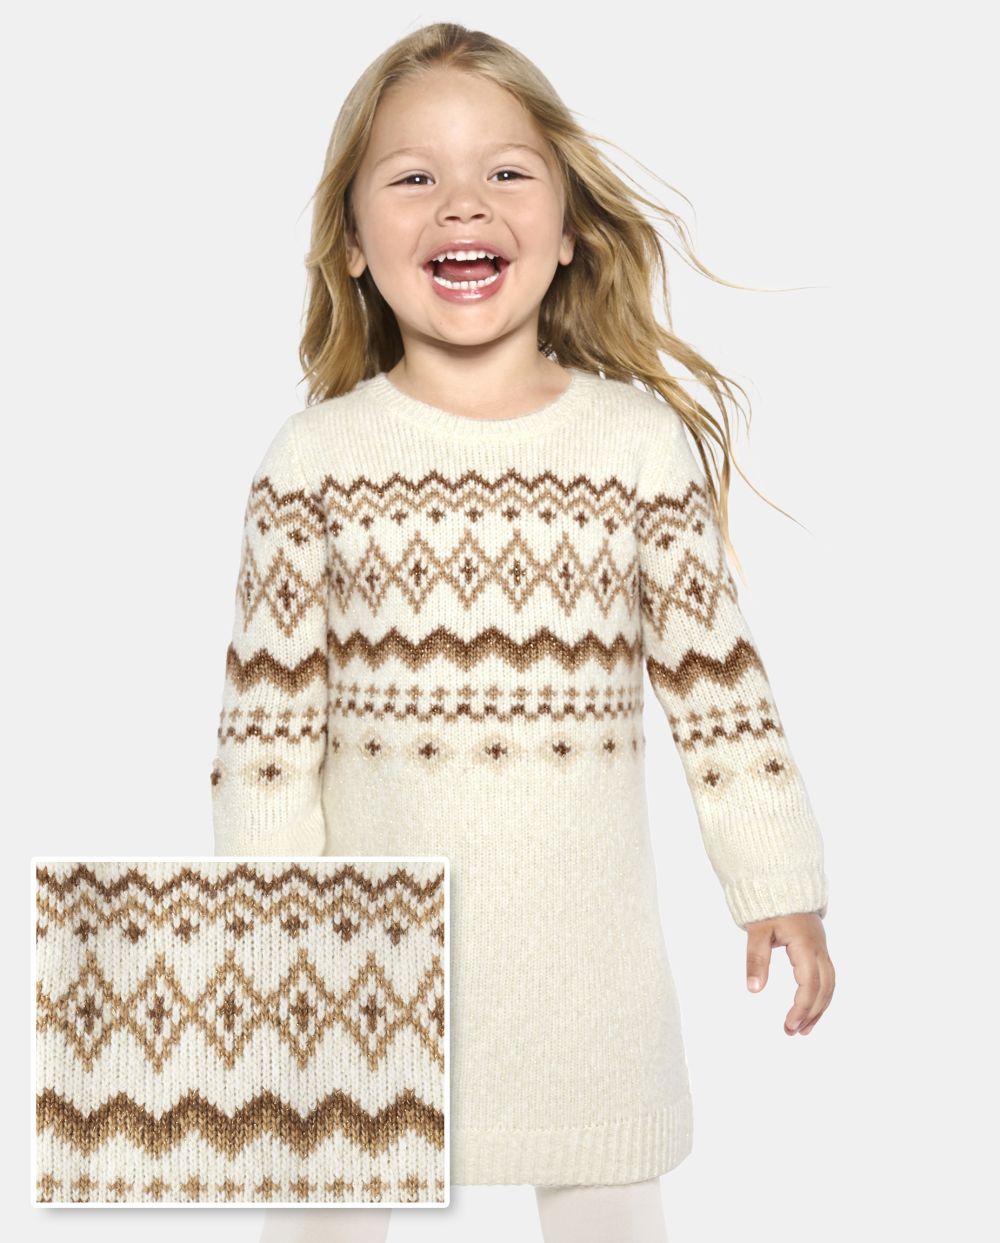 Tall Toddler Baby Sweater Above the Knee Long Sleeves Crew Neck Dress